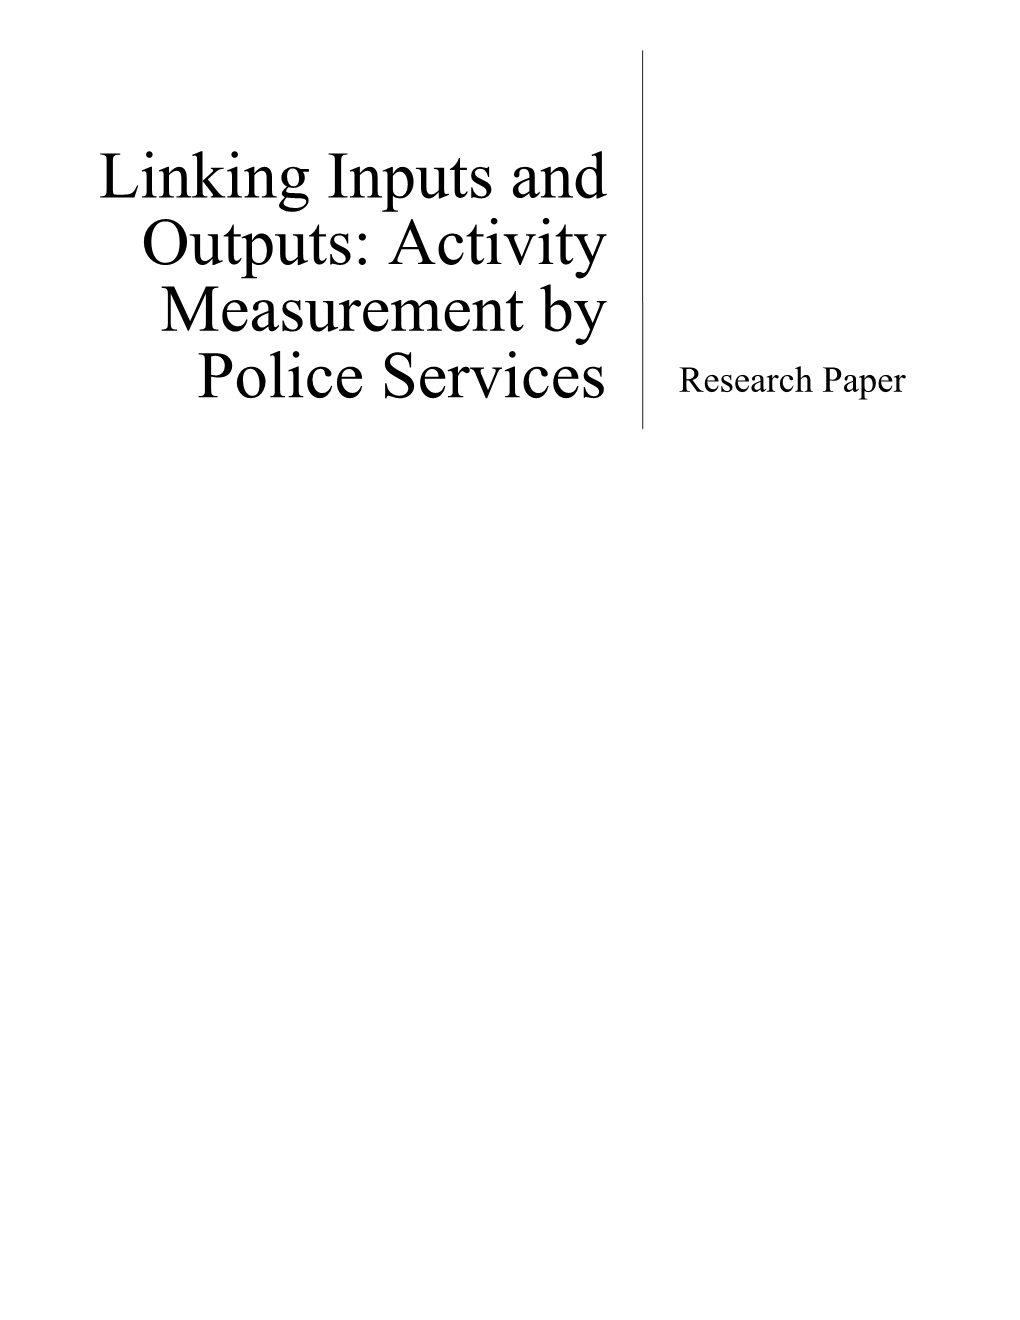 Linking Inputs and Outputs: Activity Measurement by Police Services Research Paper